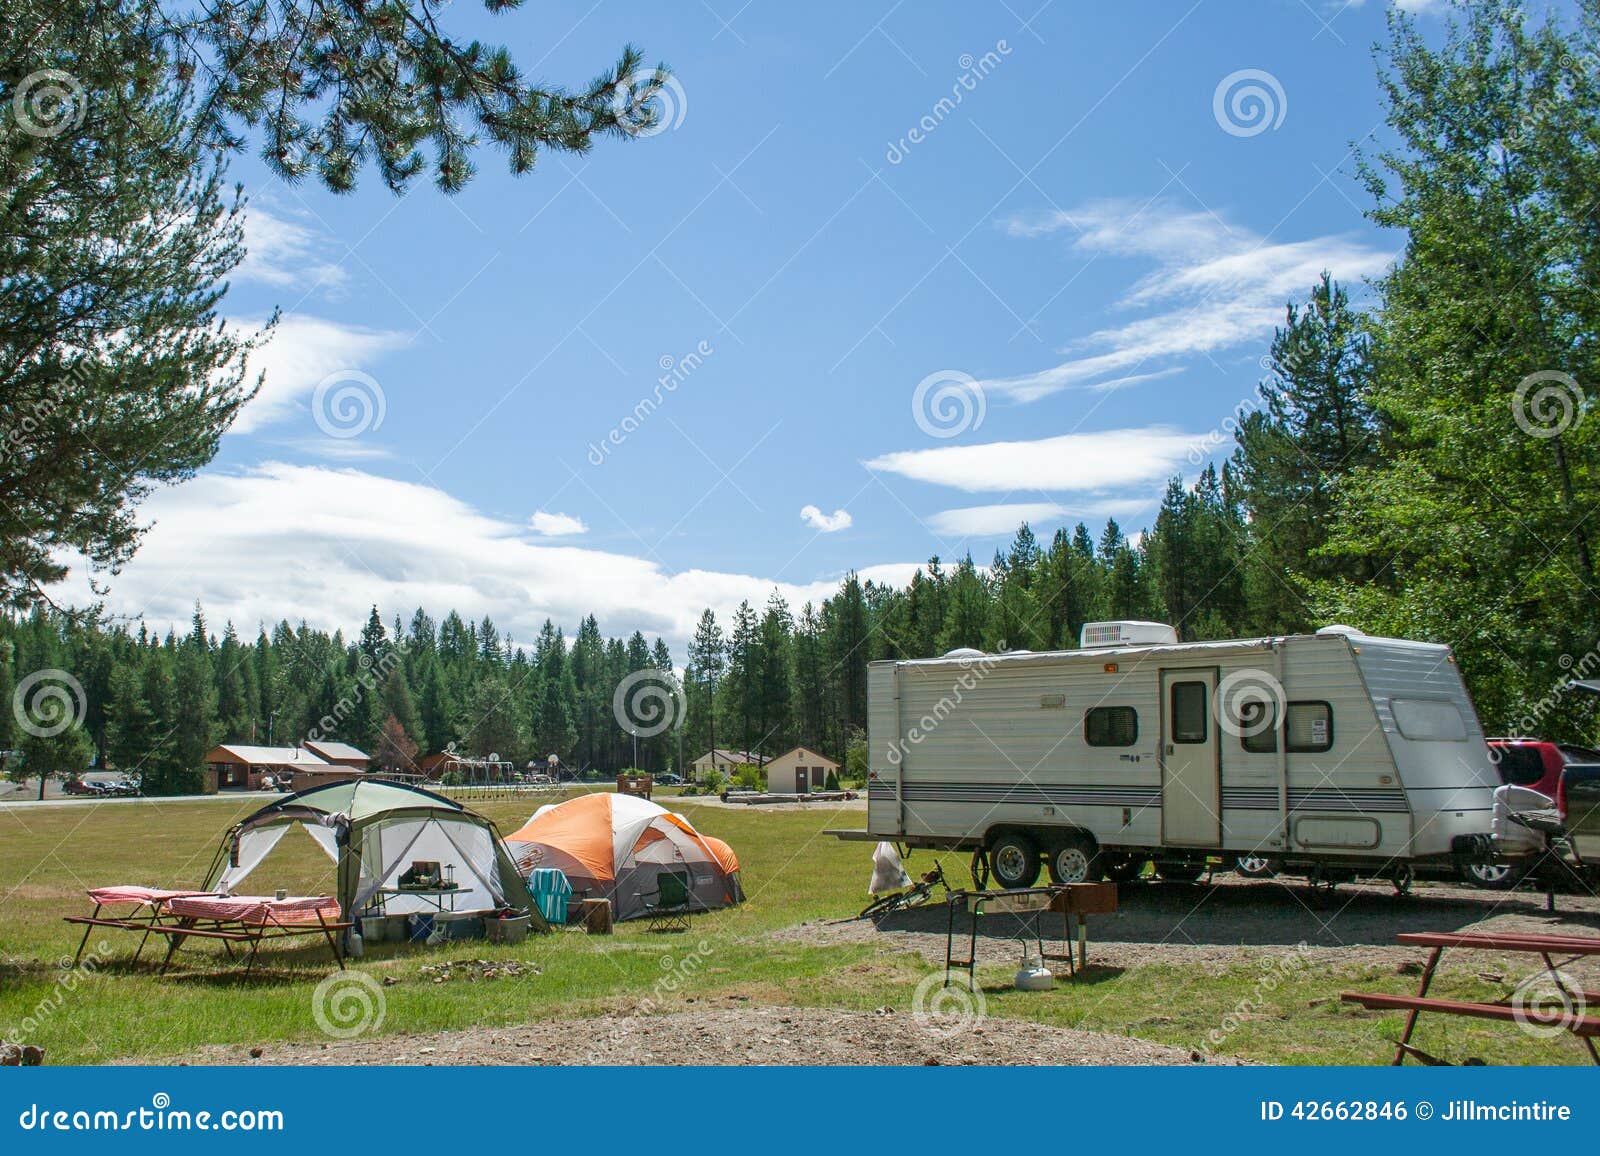 rv and tent campsite